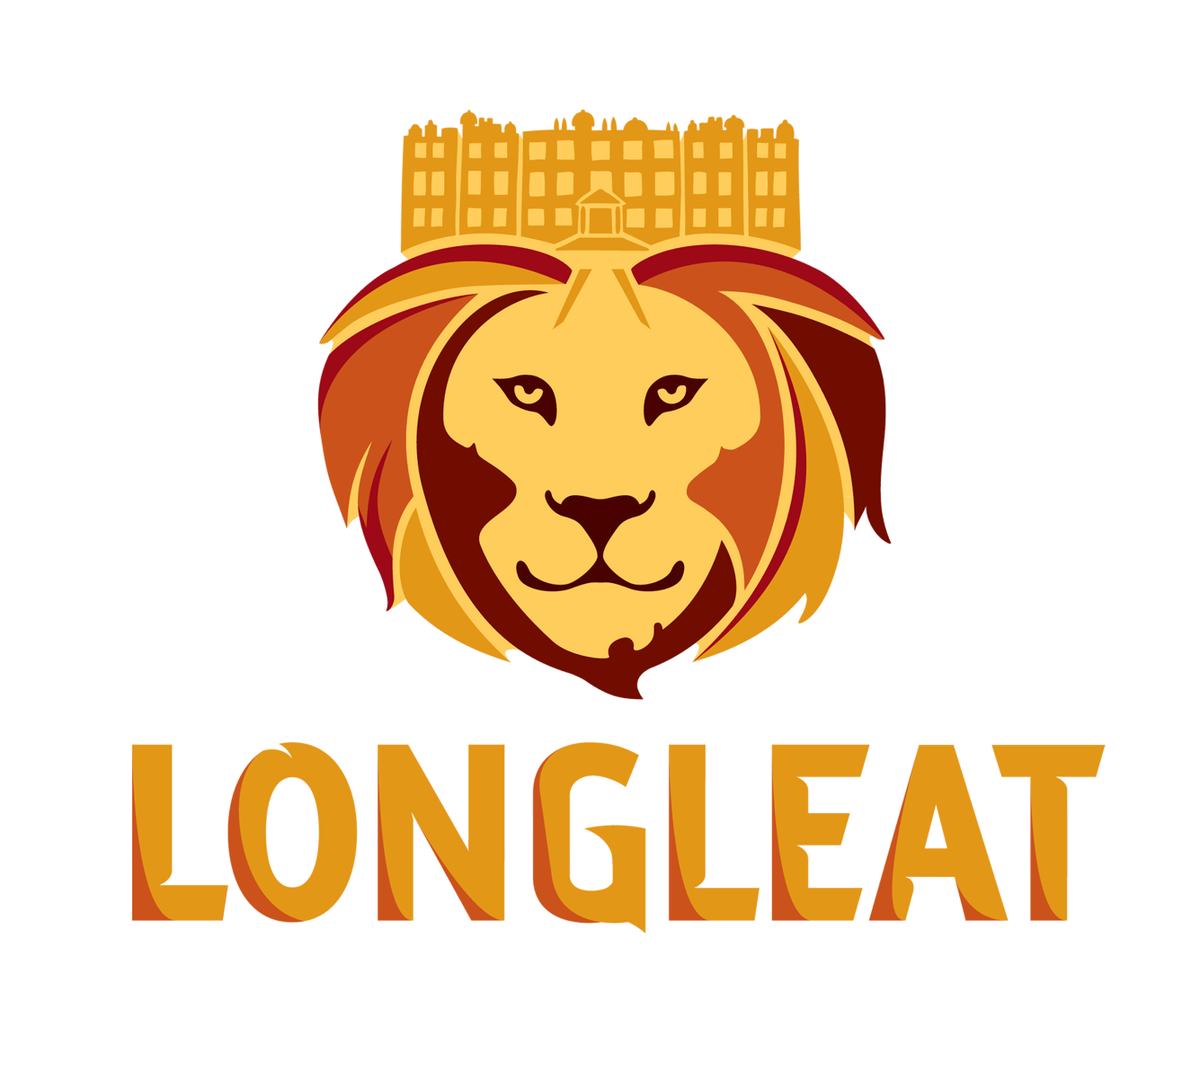 Famous Cat Logo - Longleat's our new logo! It shows off our famous